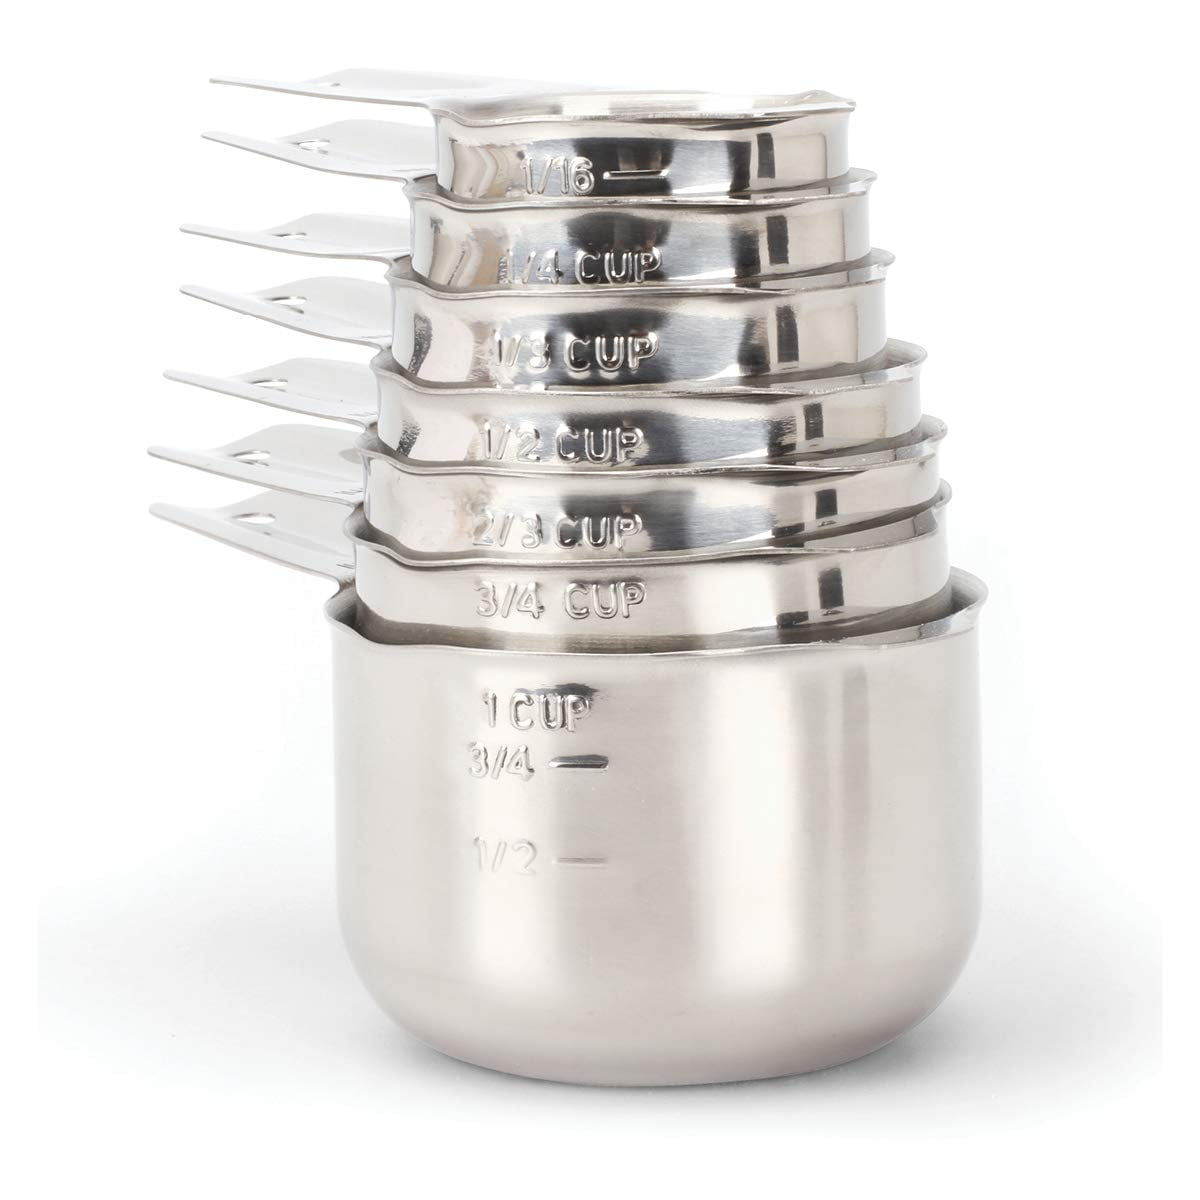 Tablecraft 1/4 Cup Measuring Cup Stainless Steel 85665 